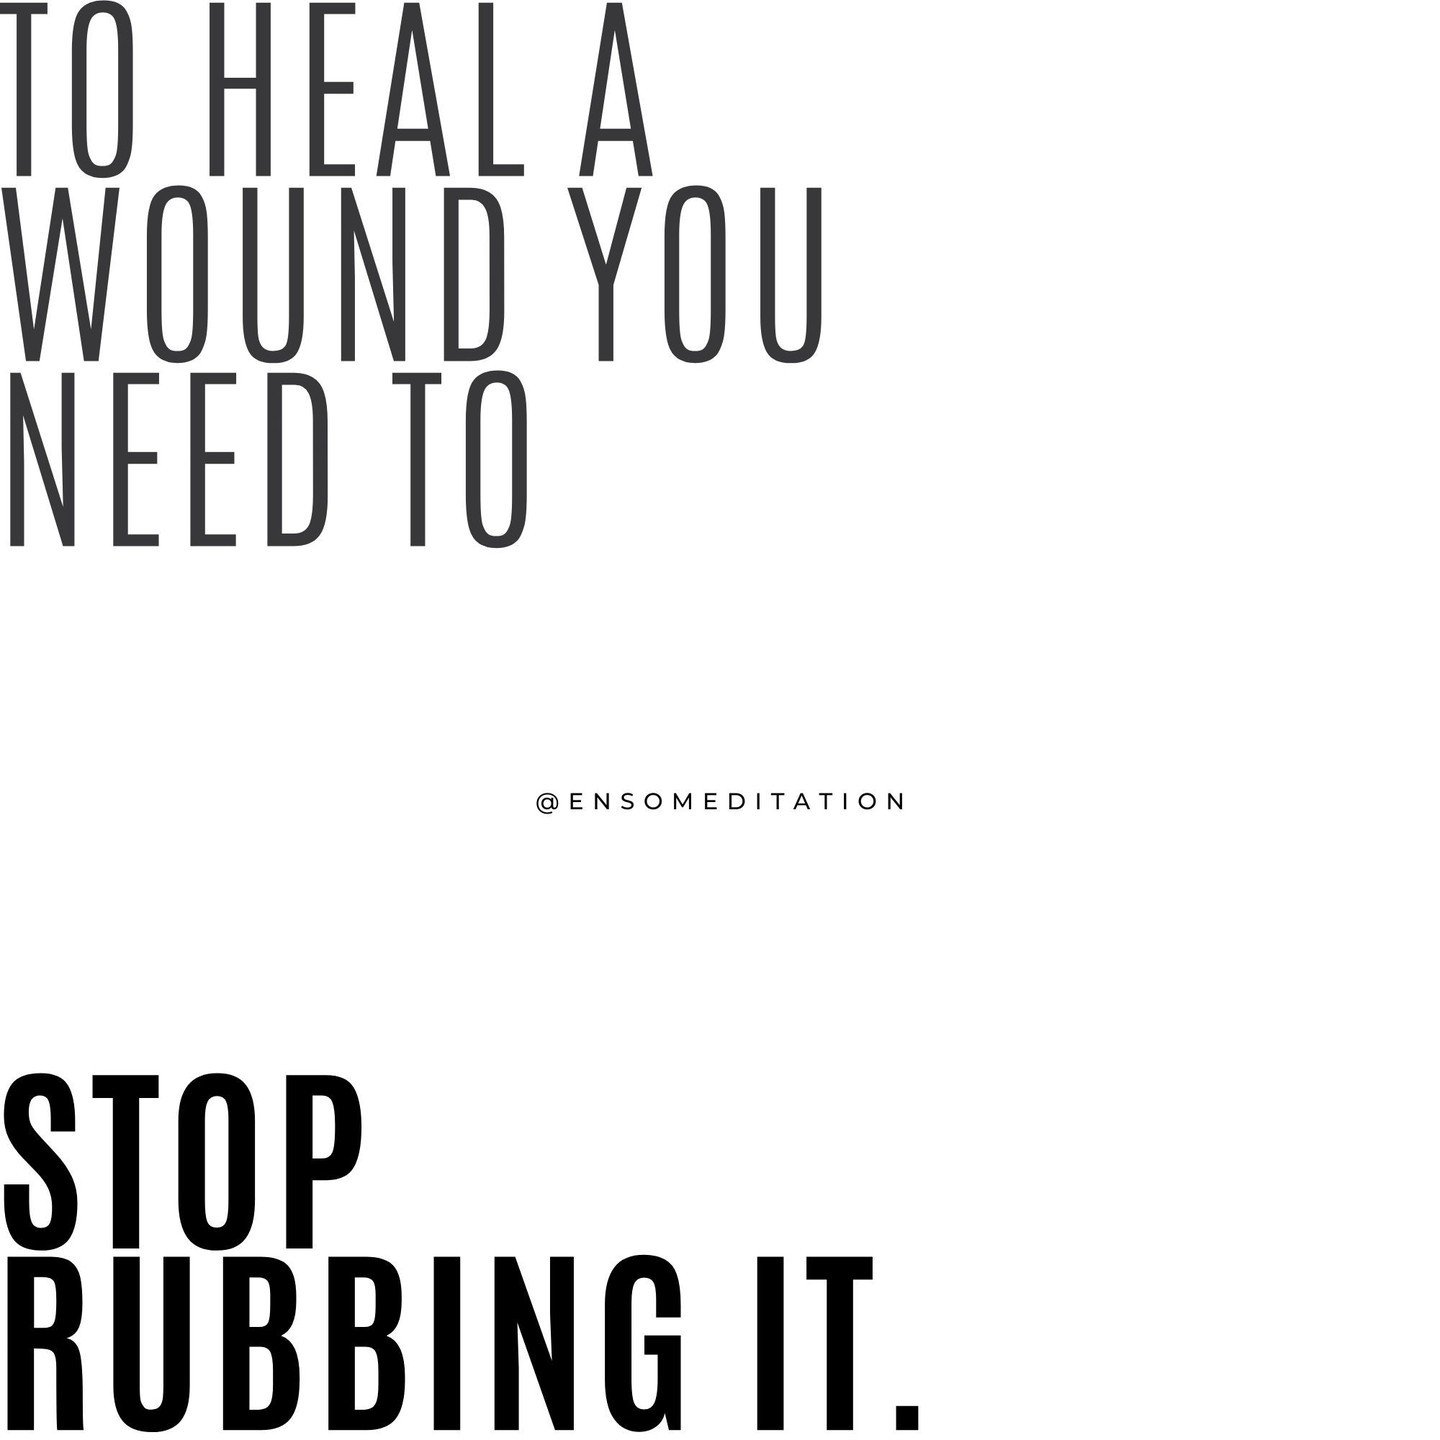 Sometimes the path to healing starts with a pause. It&rsquo;s about giving ourselves the space to recover, without interference, without the constant replay of what went wrong. It&rsquo;s about letting go to let the healing begin.

Remember, it&rsquo